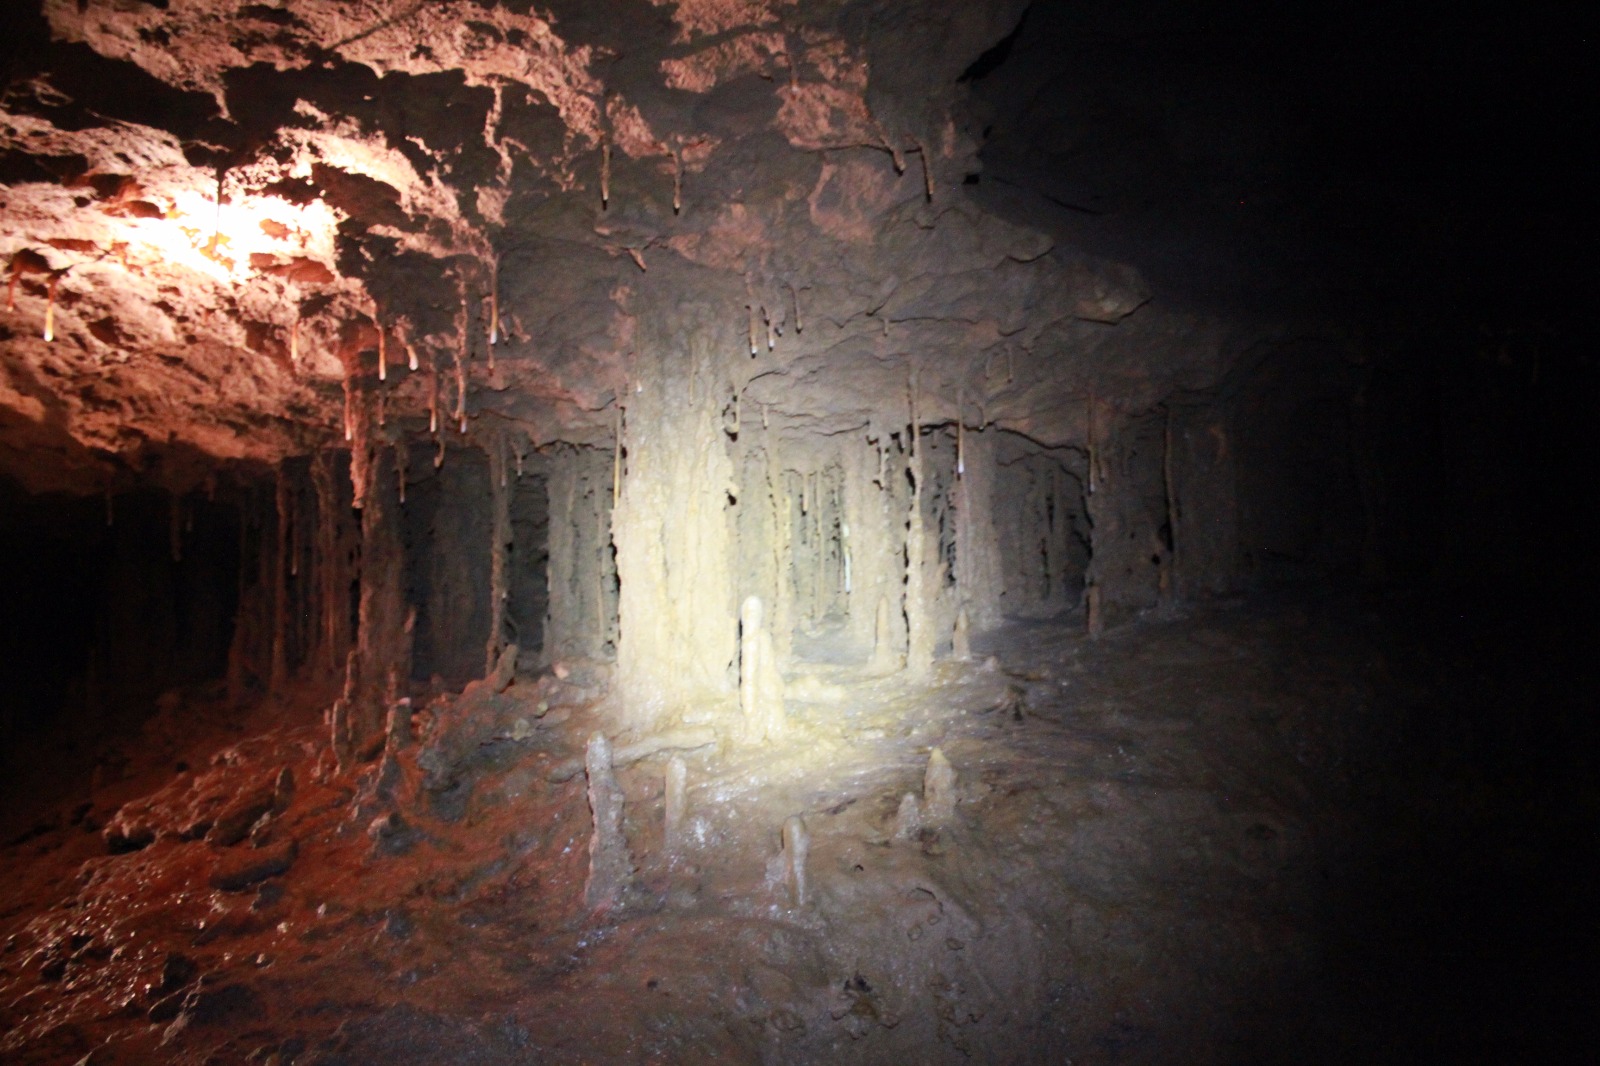 Dr Wang studies rocks inside caves to uncover historical climate patterns and make predictions of future climate change (Source: Wang Xianfeng) 